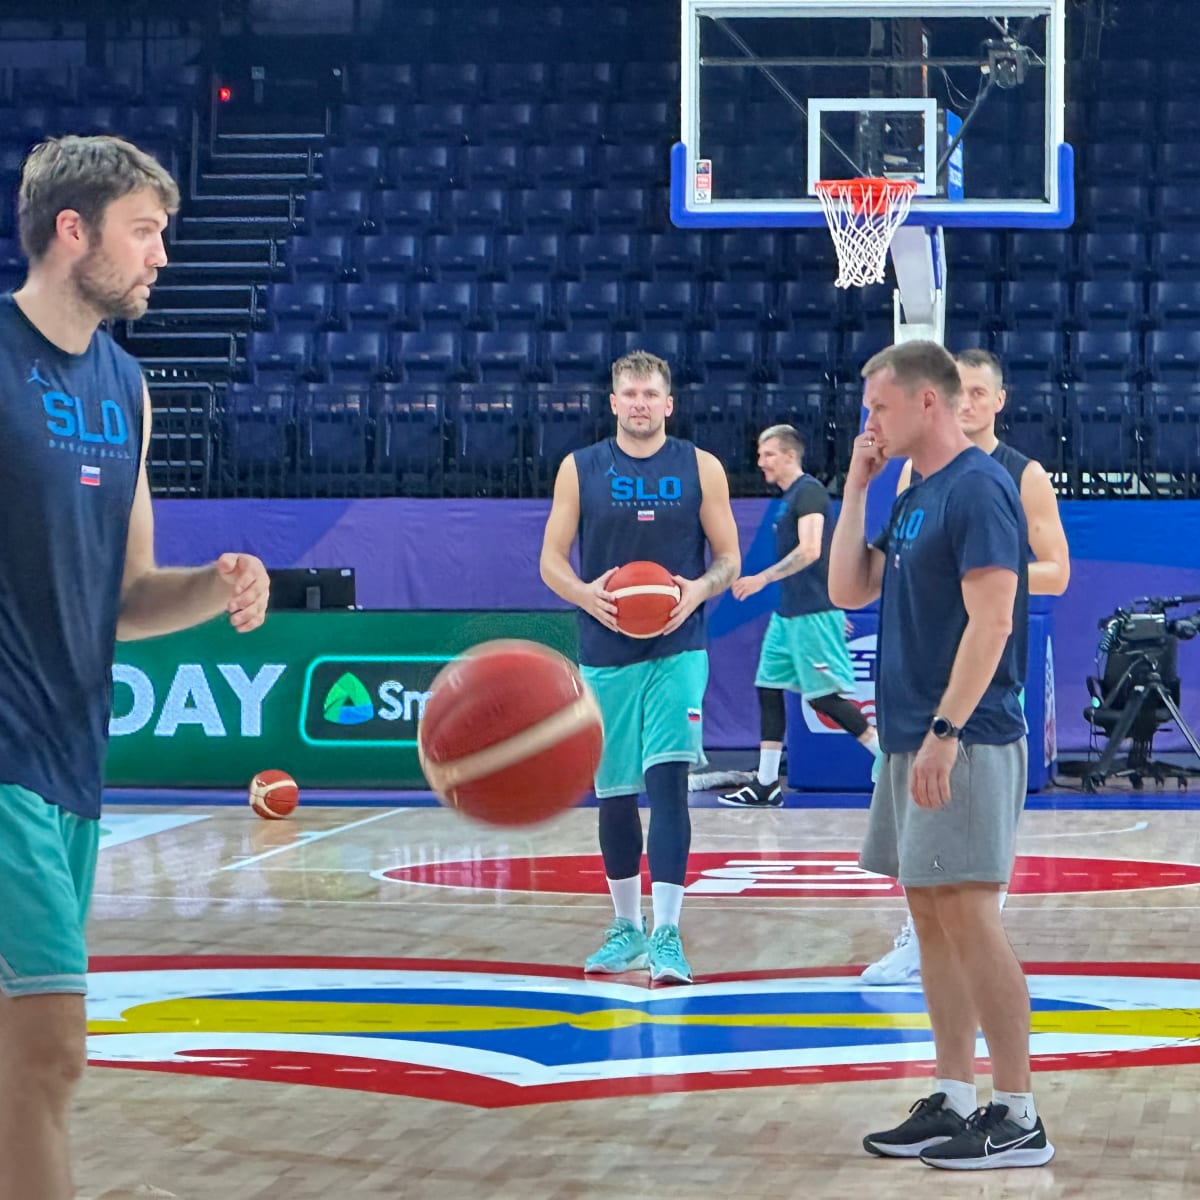 What to expect as Mavs' Luka Doncic reports to Slovenia's World Cup  qualifier practices